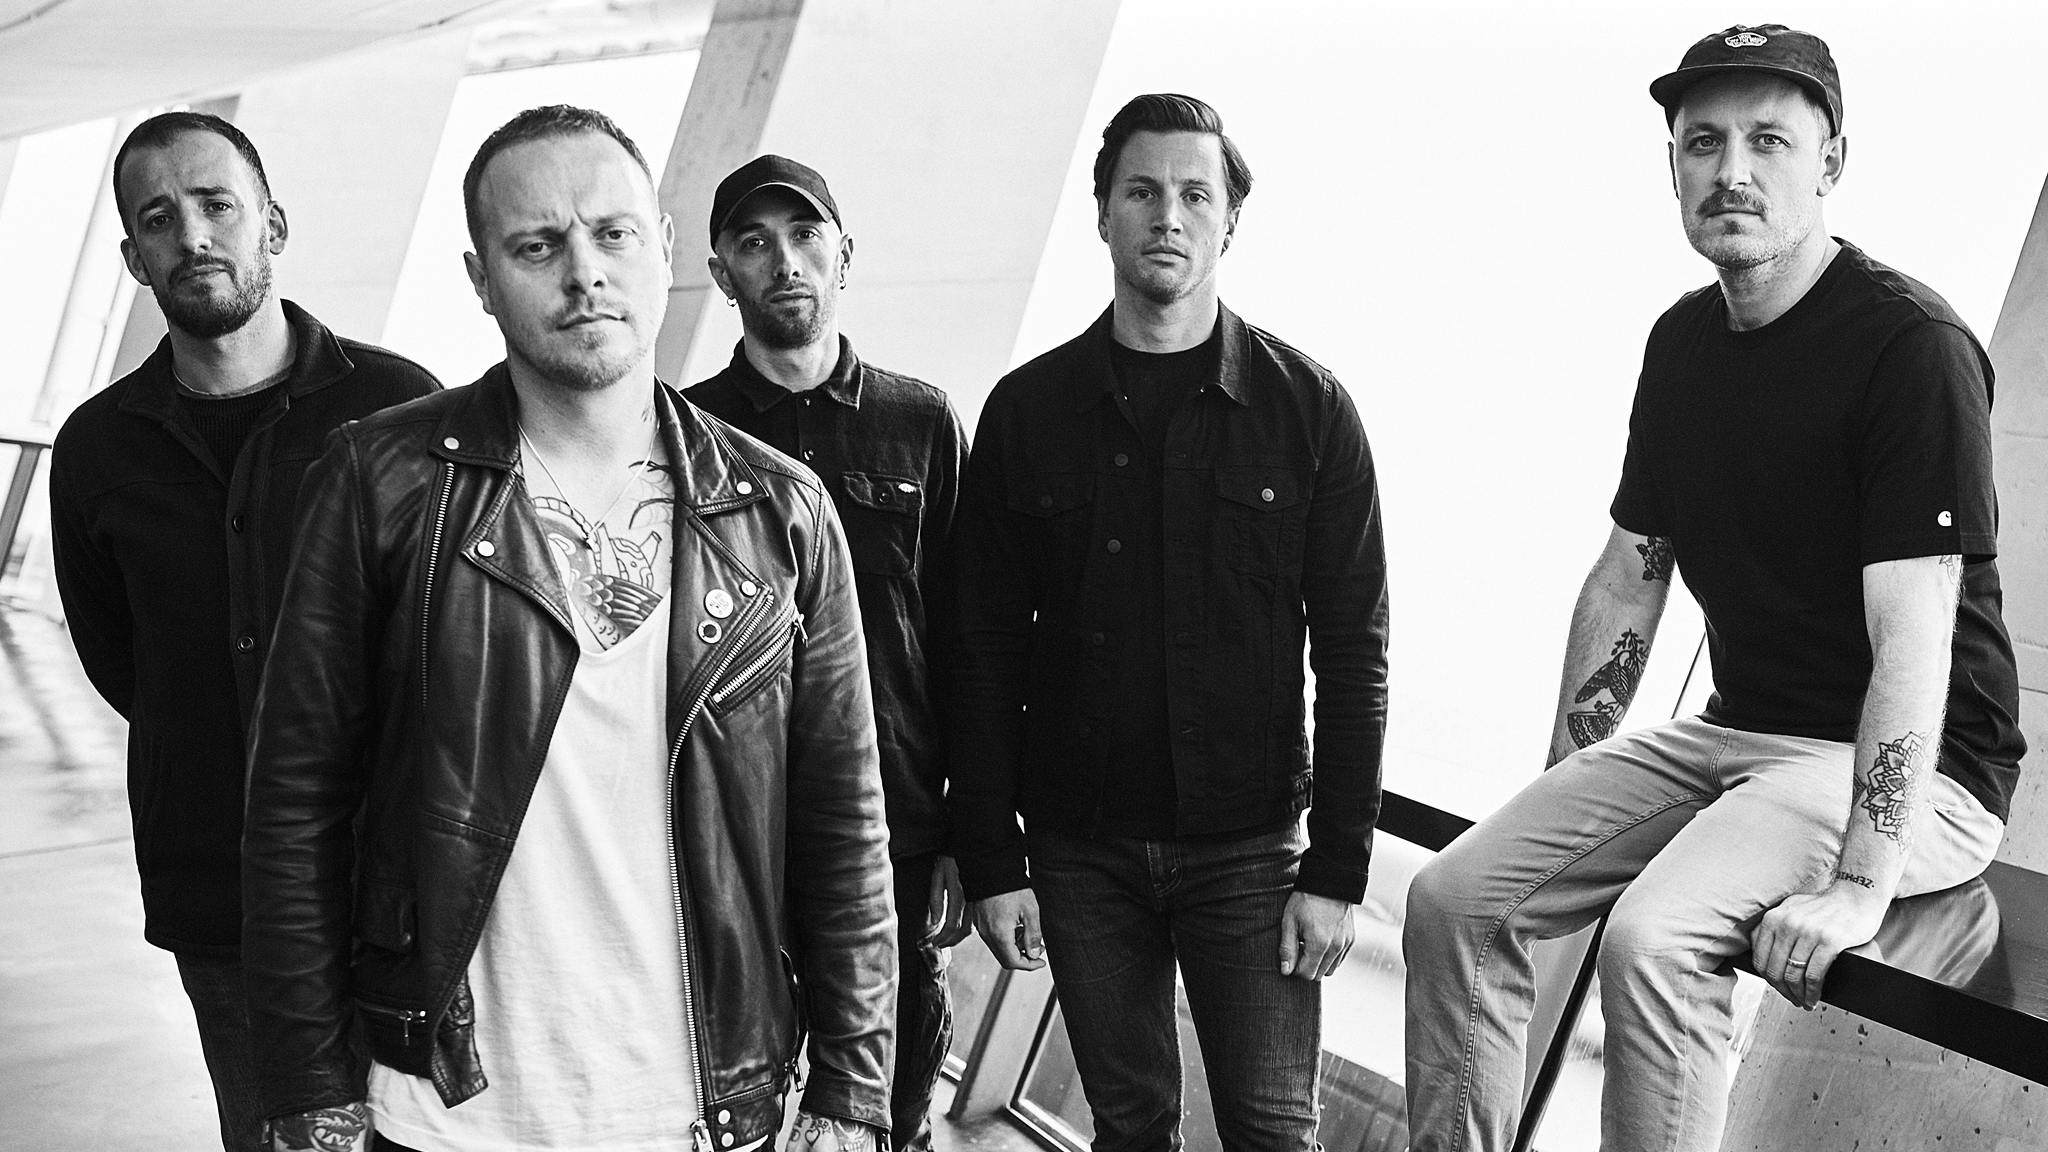 Architects announce intimate hometown show to celebrate new album